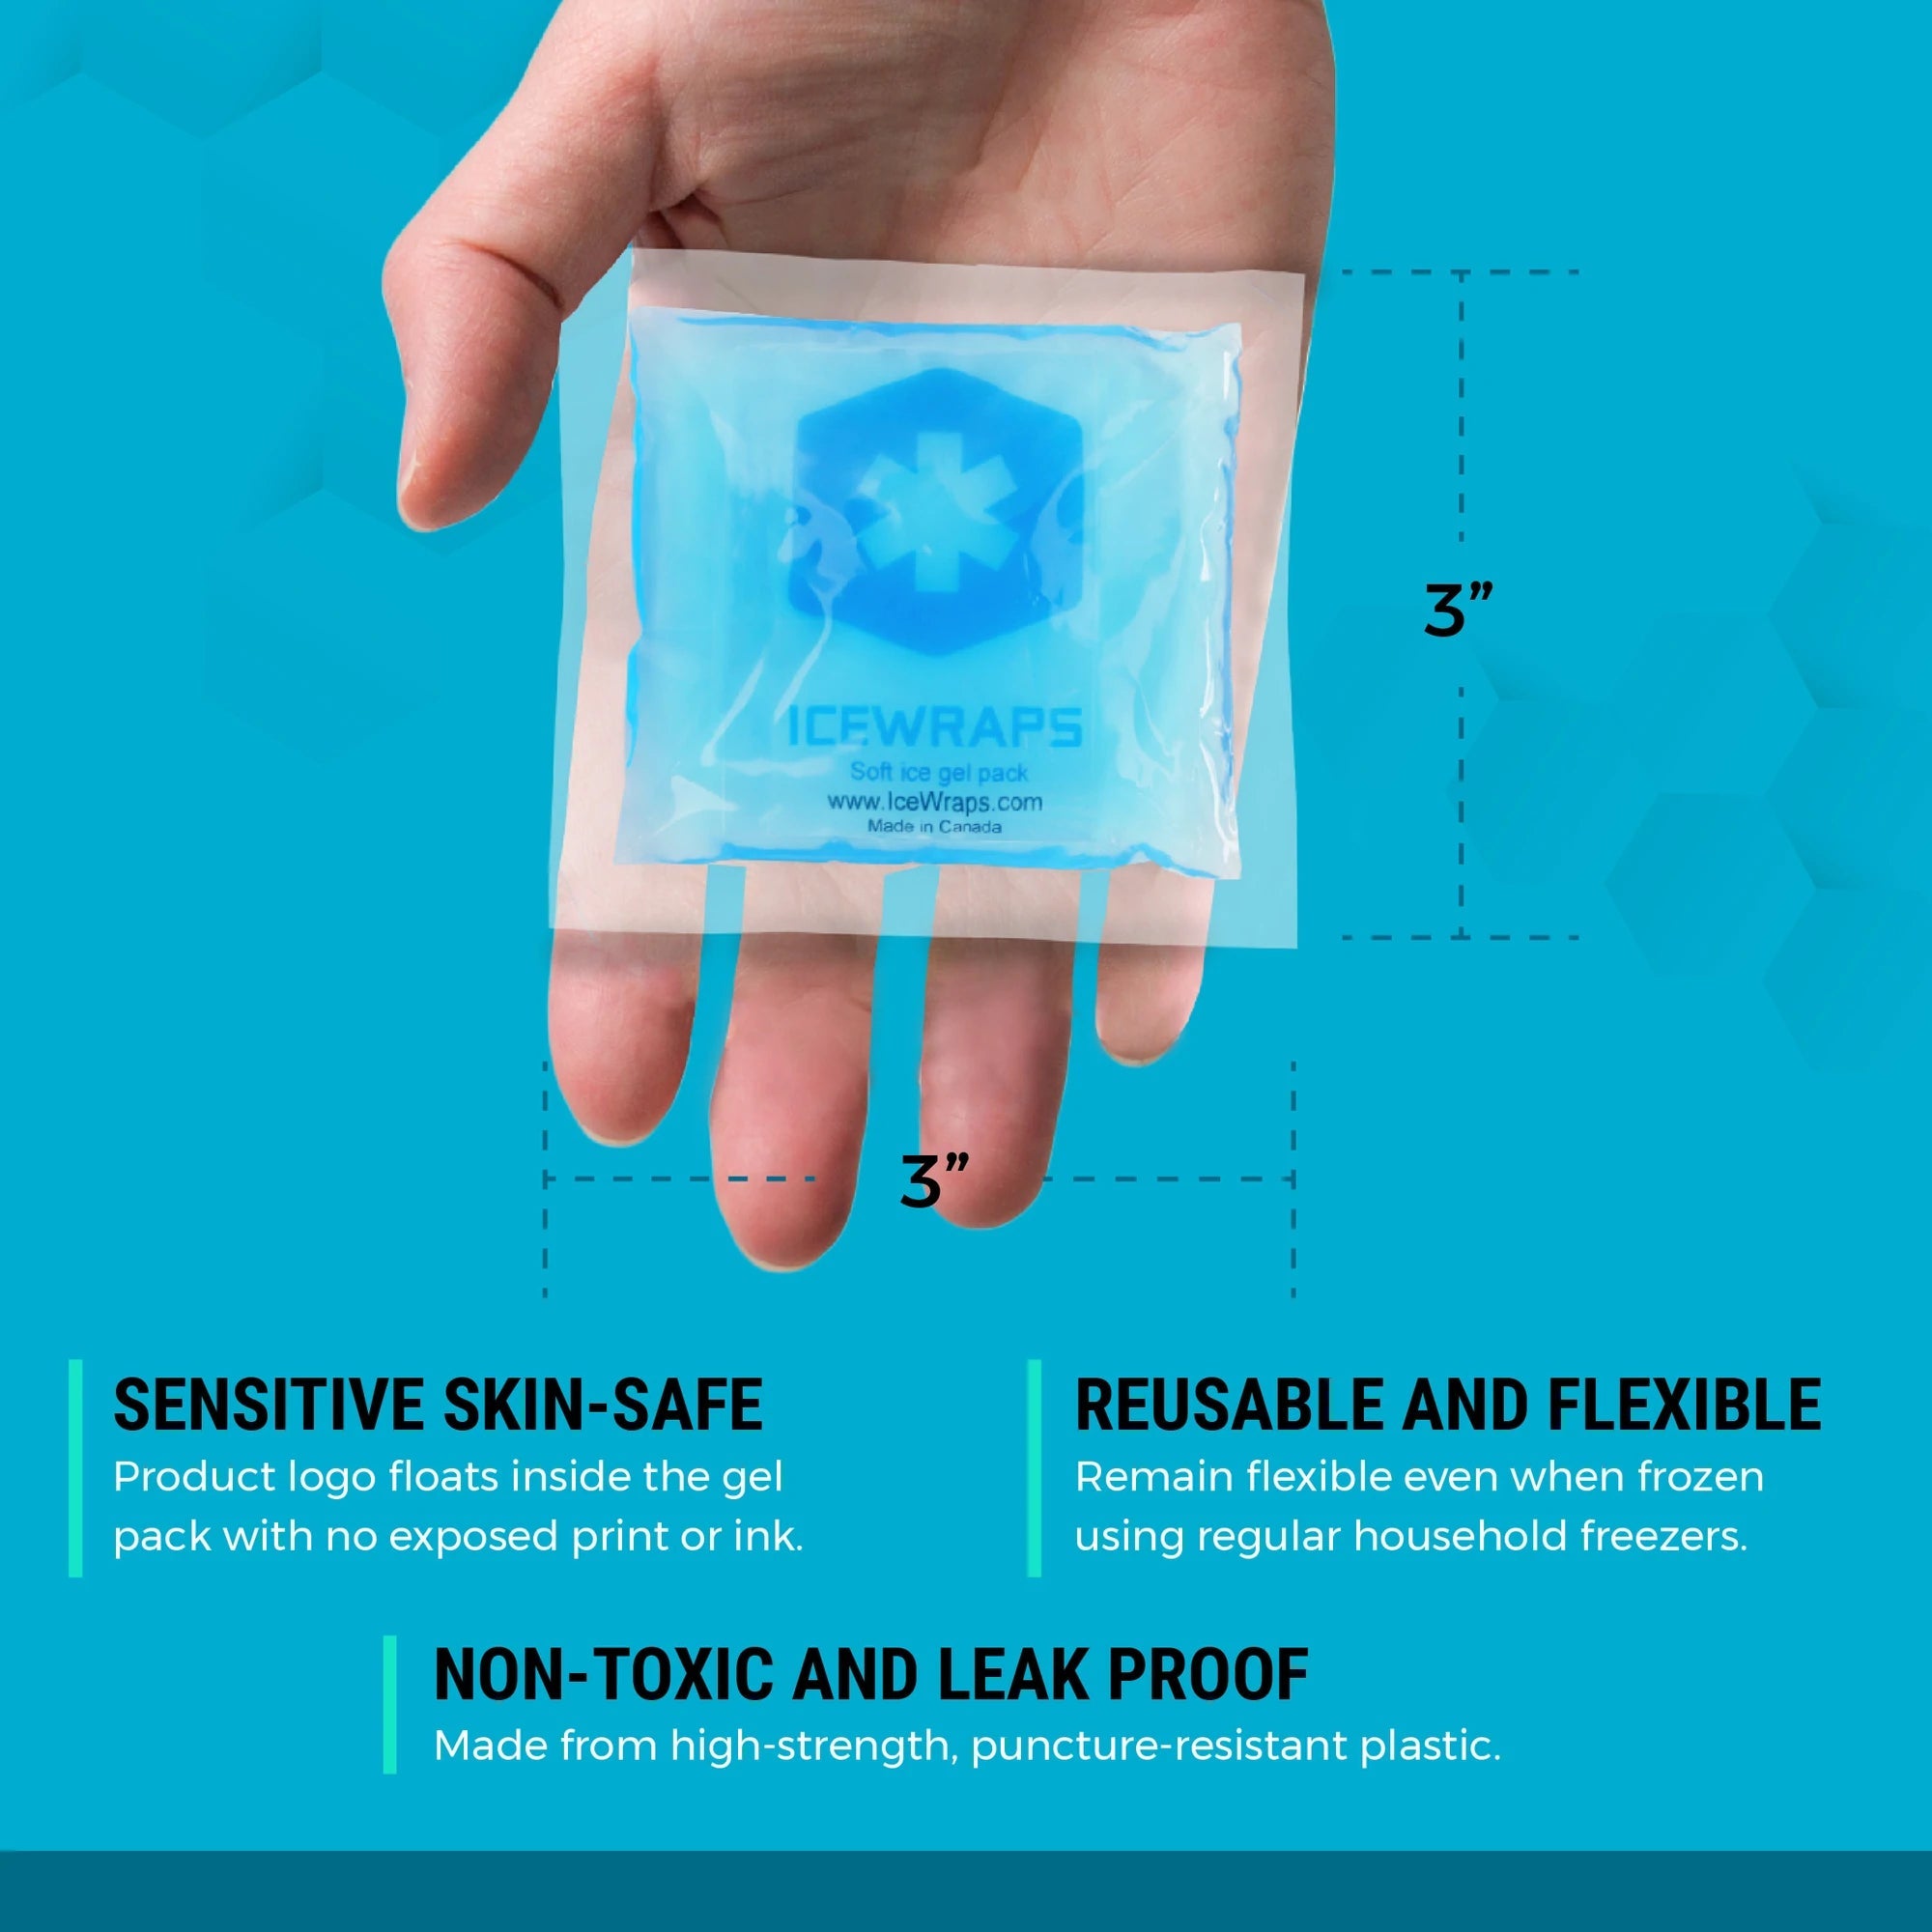 What's Inside an Ice Pack?